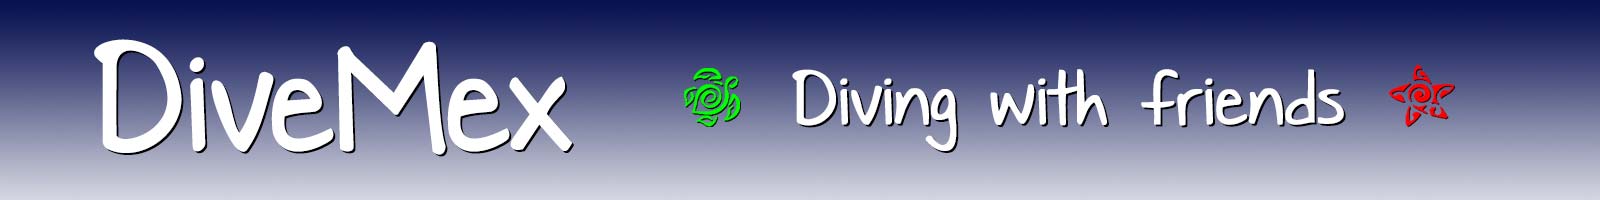 Banner with logo and writing: DiveMex - Diving with friends